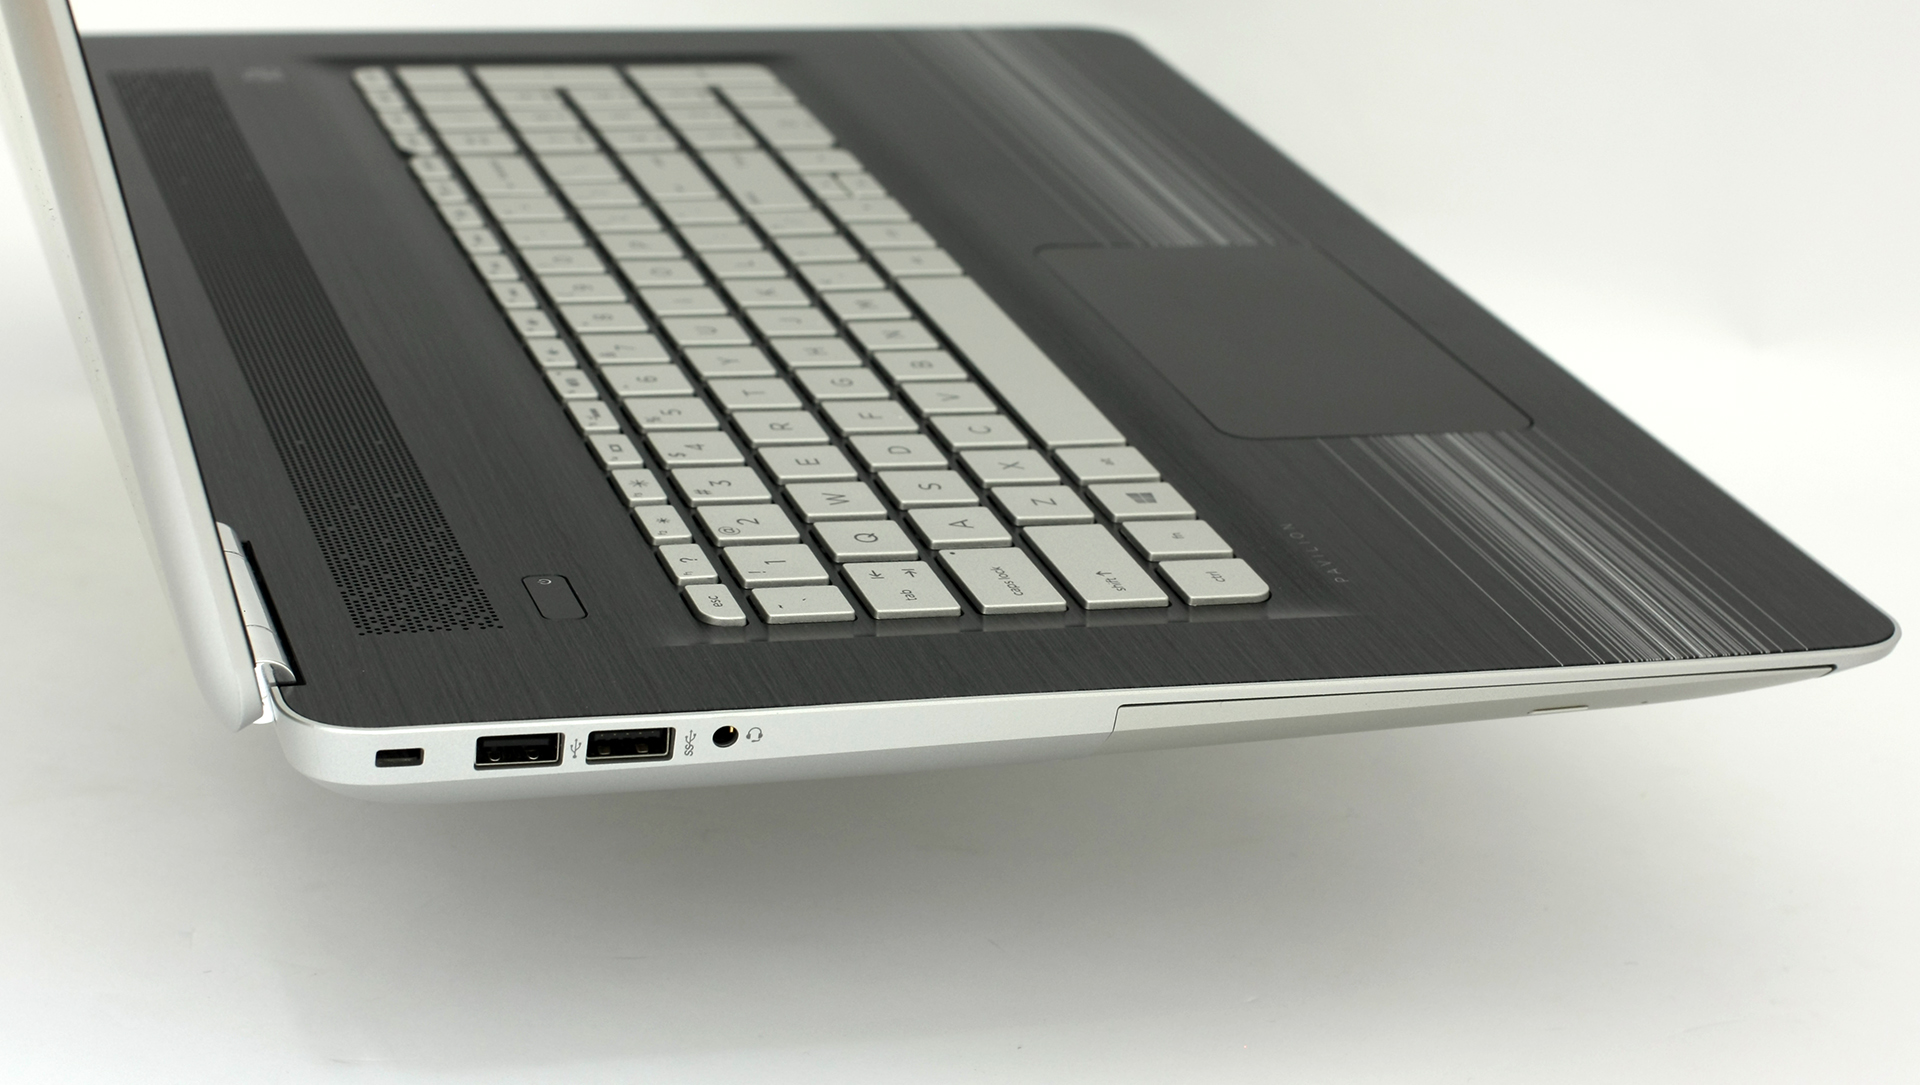 HP Pavilion 17 (2016) review - affordable, powerful, distant from